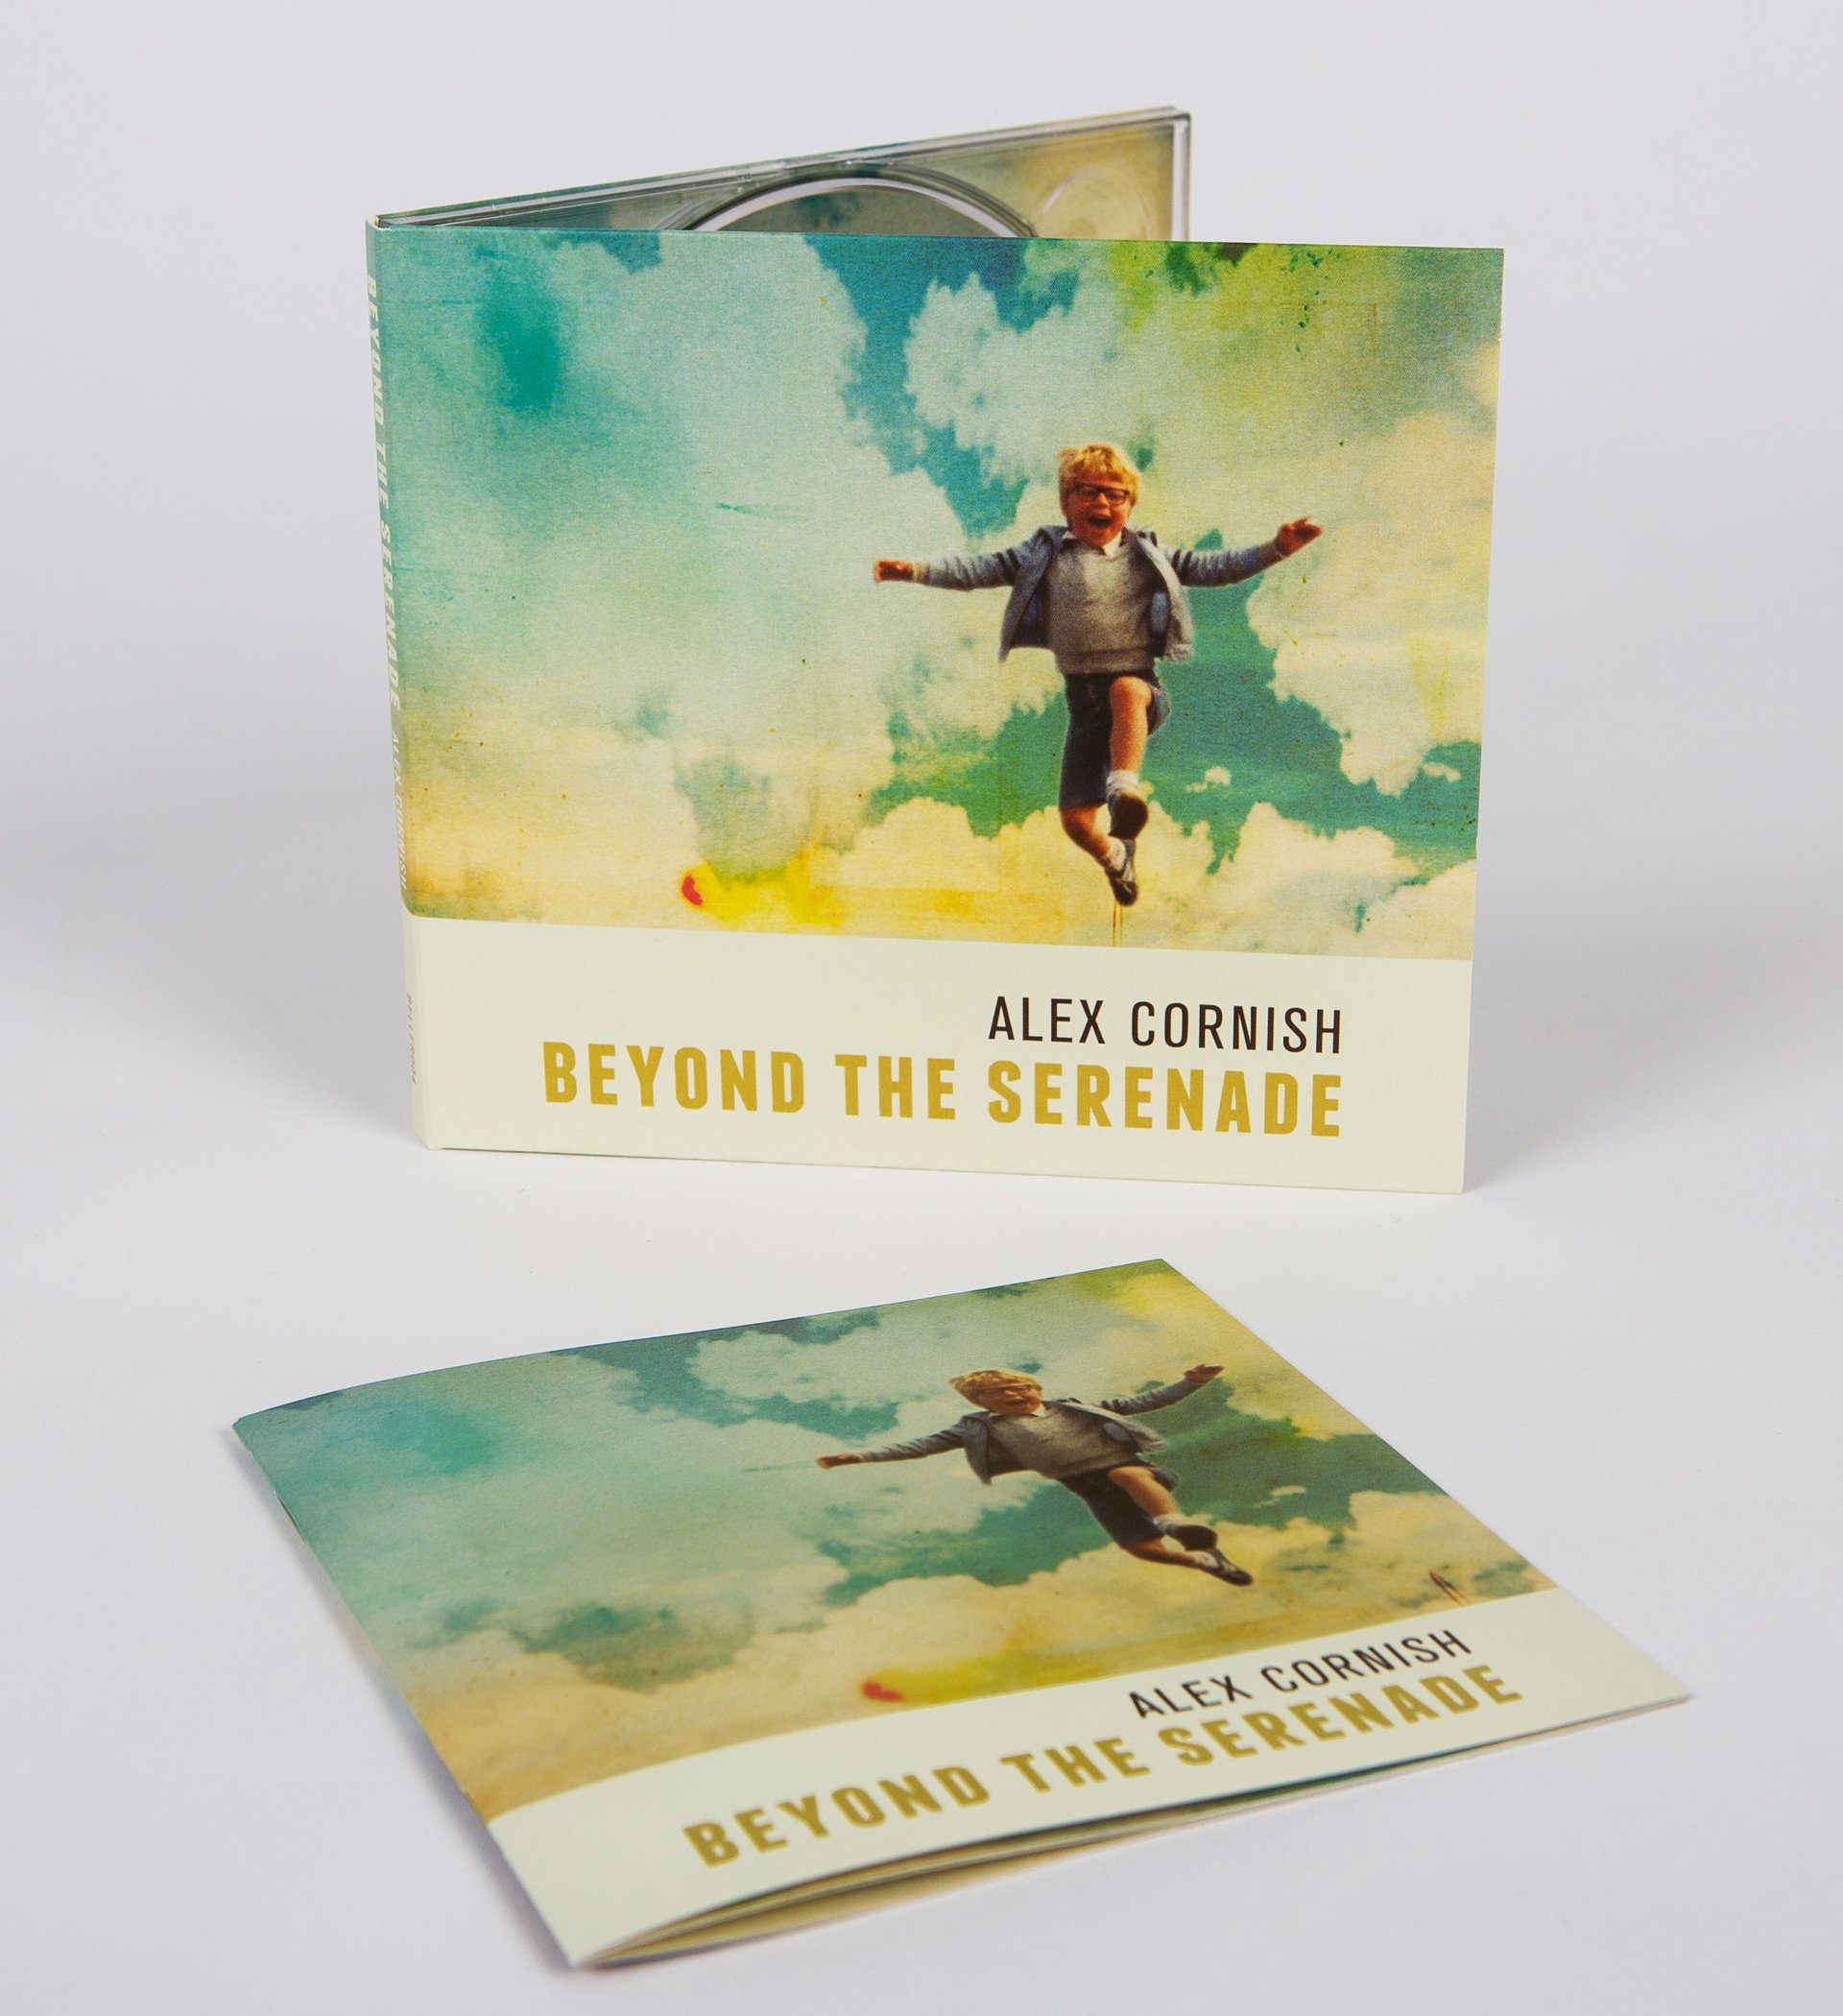 Alex Cornish CD Artwork depicts Alex as a young boy jumping into the air